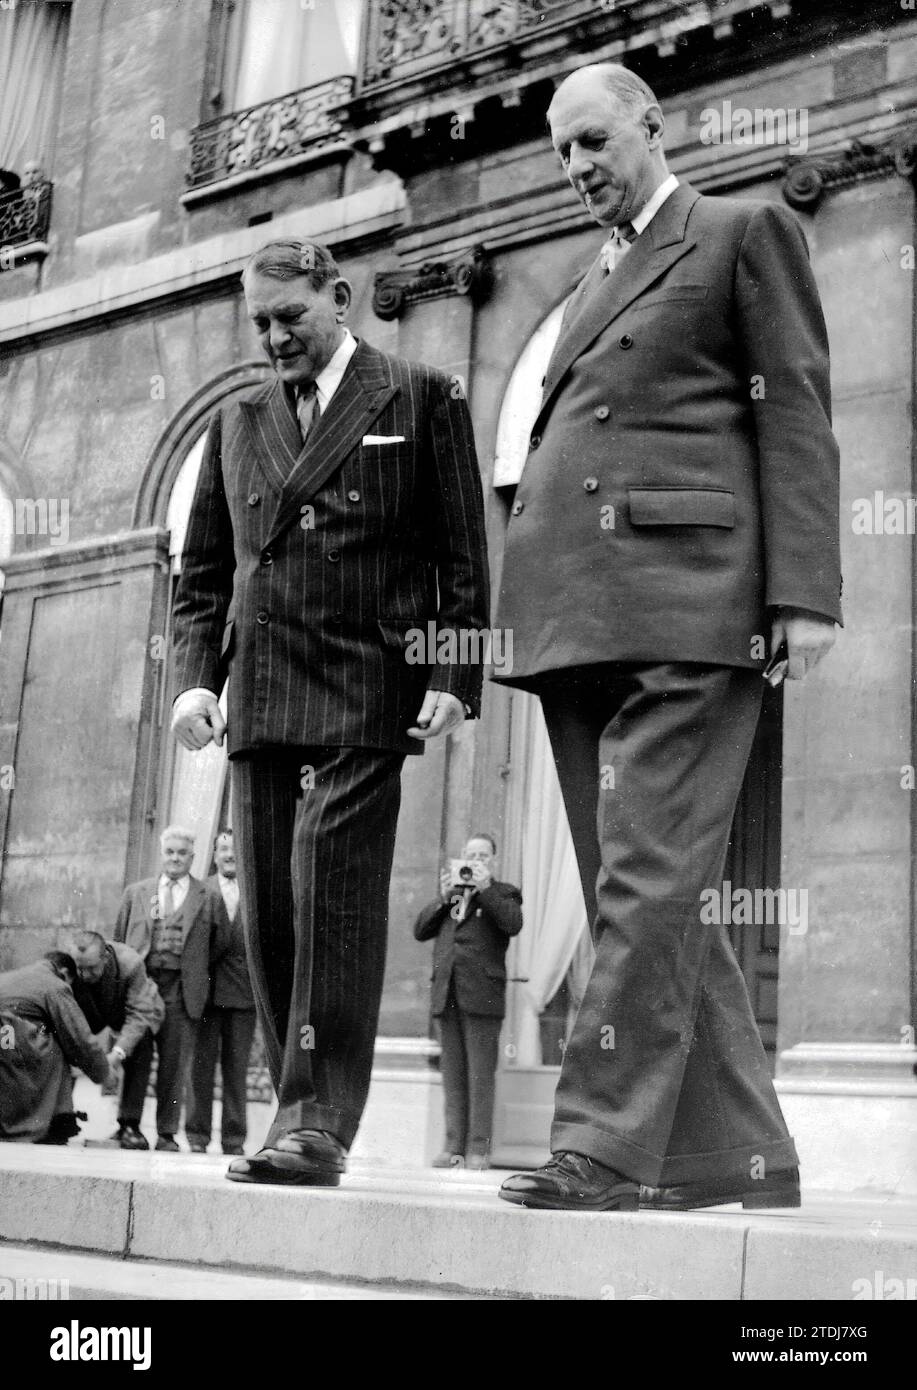 05/30/1958. Charles de Gaulle with René Coty at his inauguration. Credit: Album / Archivo ABC / Torremocha Stock Photo